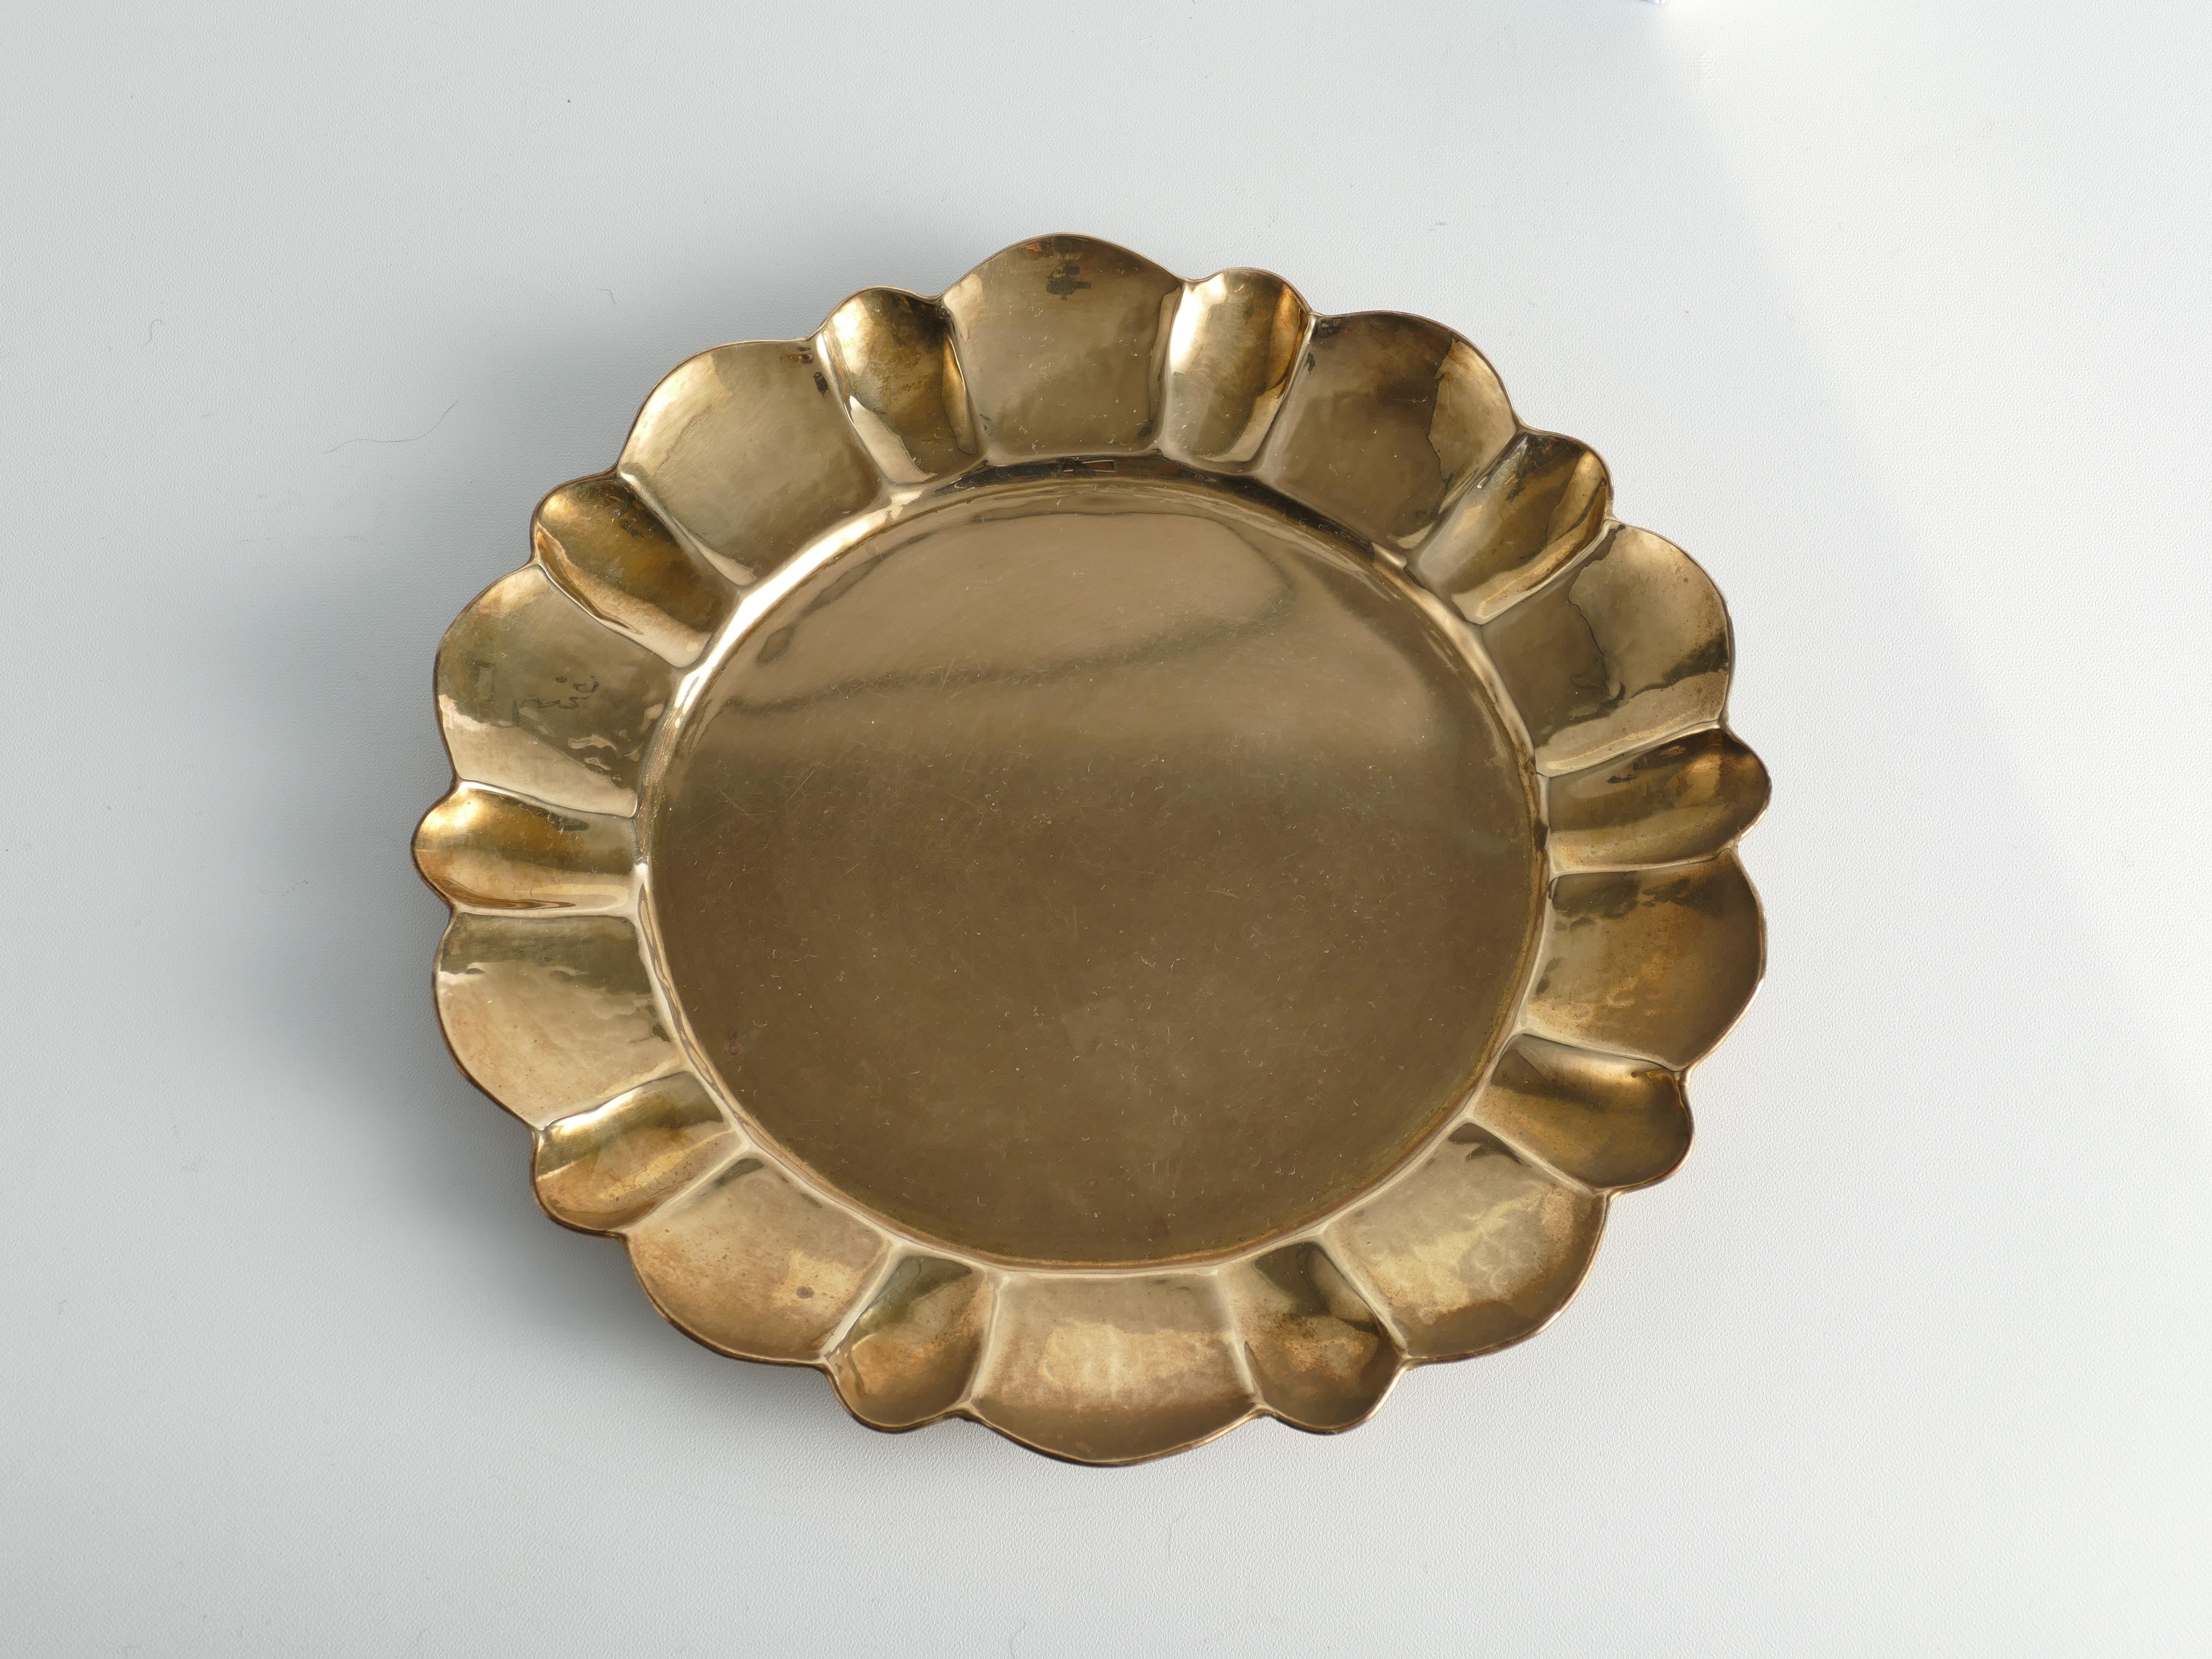 Masterfully crafted Hollywood Regency / Swedish Grace round brass tray by Firma Lars Holmström, Sweden. The tray has a round shape with a gracefully contoured, hand-hammered edge. Manual operation and stamped for authenticity. The hammered decor and